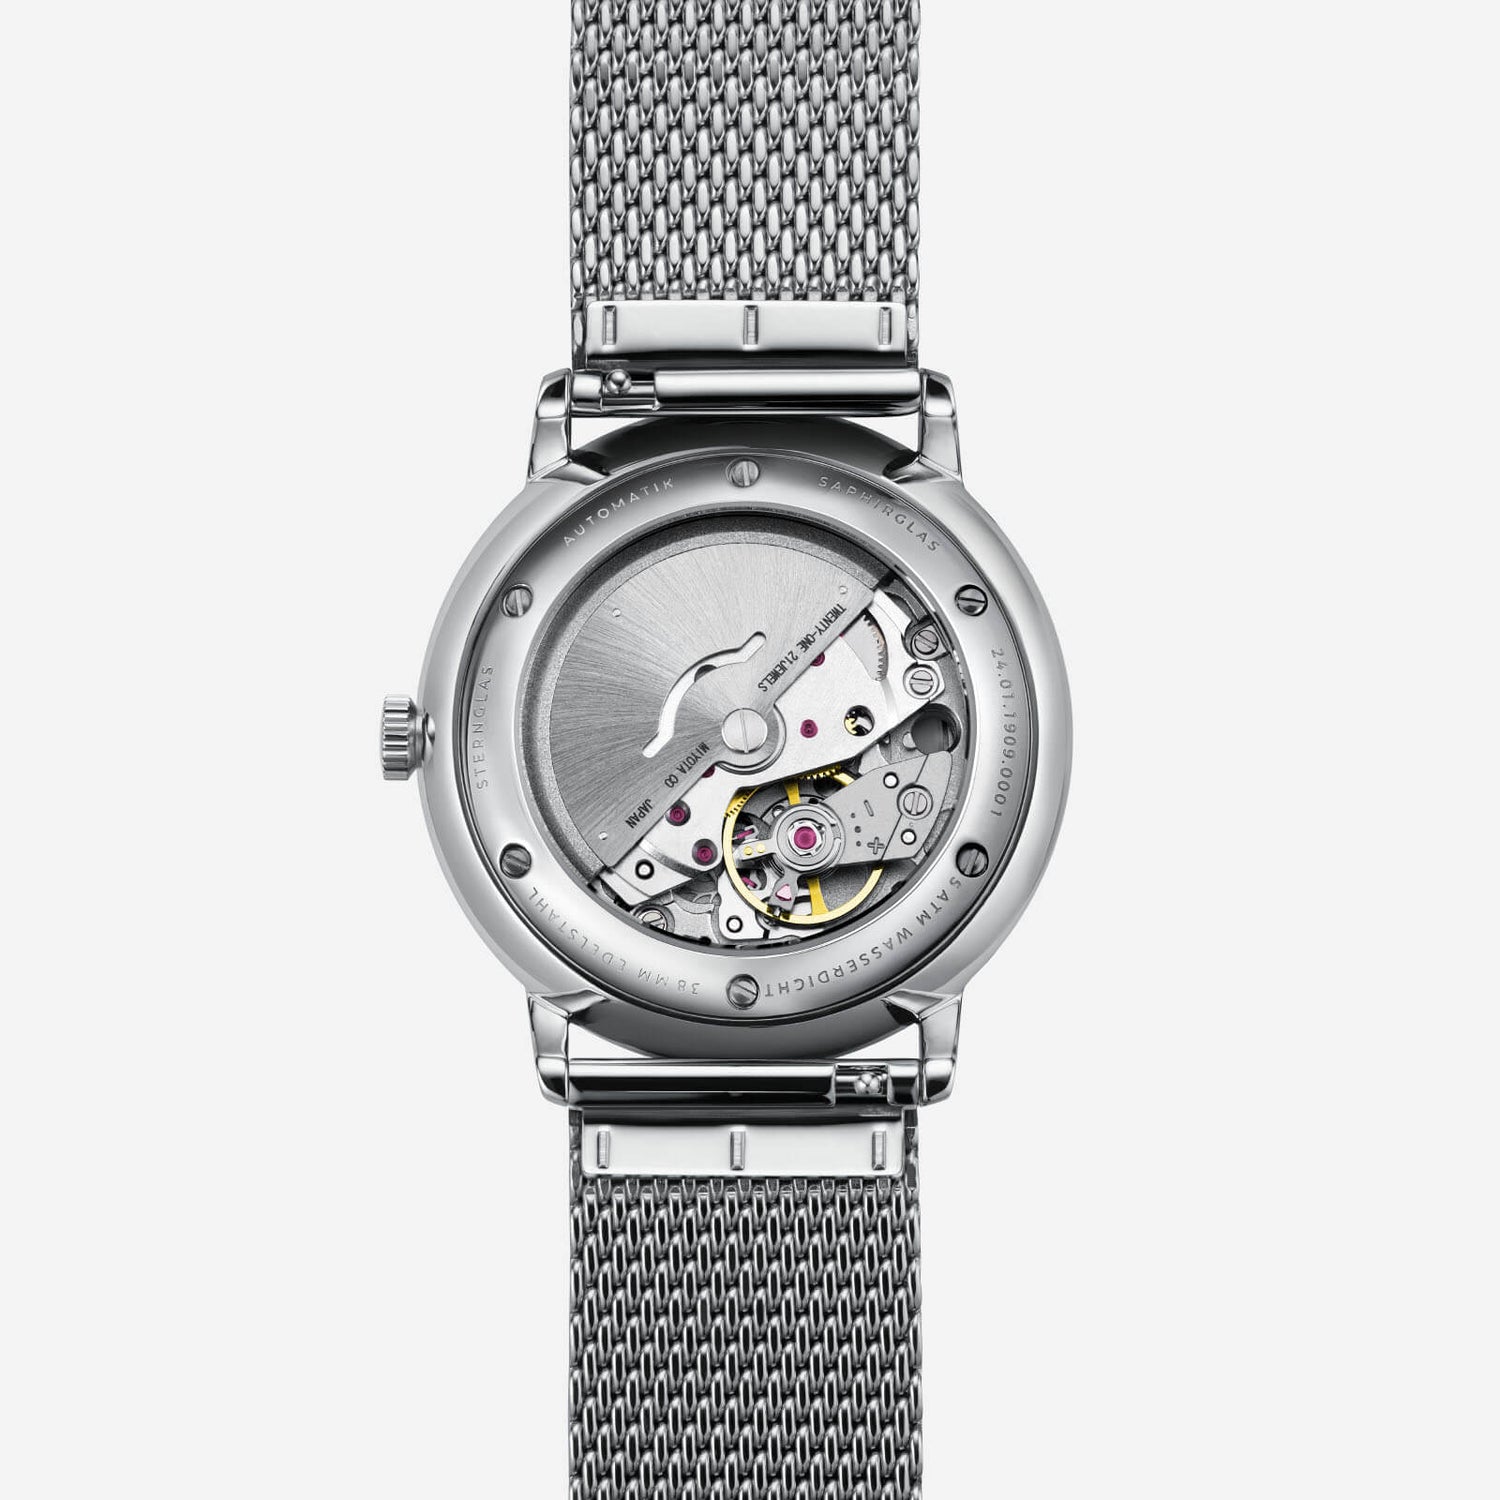 popup|See-through glass caseback|Through the see-through caseback, you can watch the rotor bring the mechanical movement to life by swinging it.